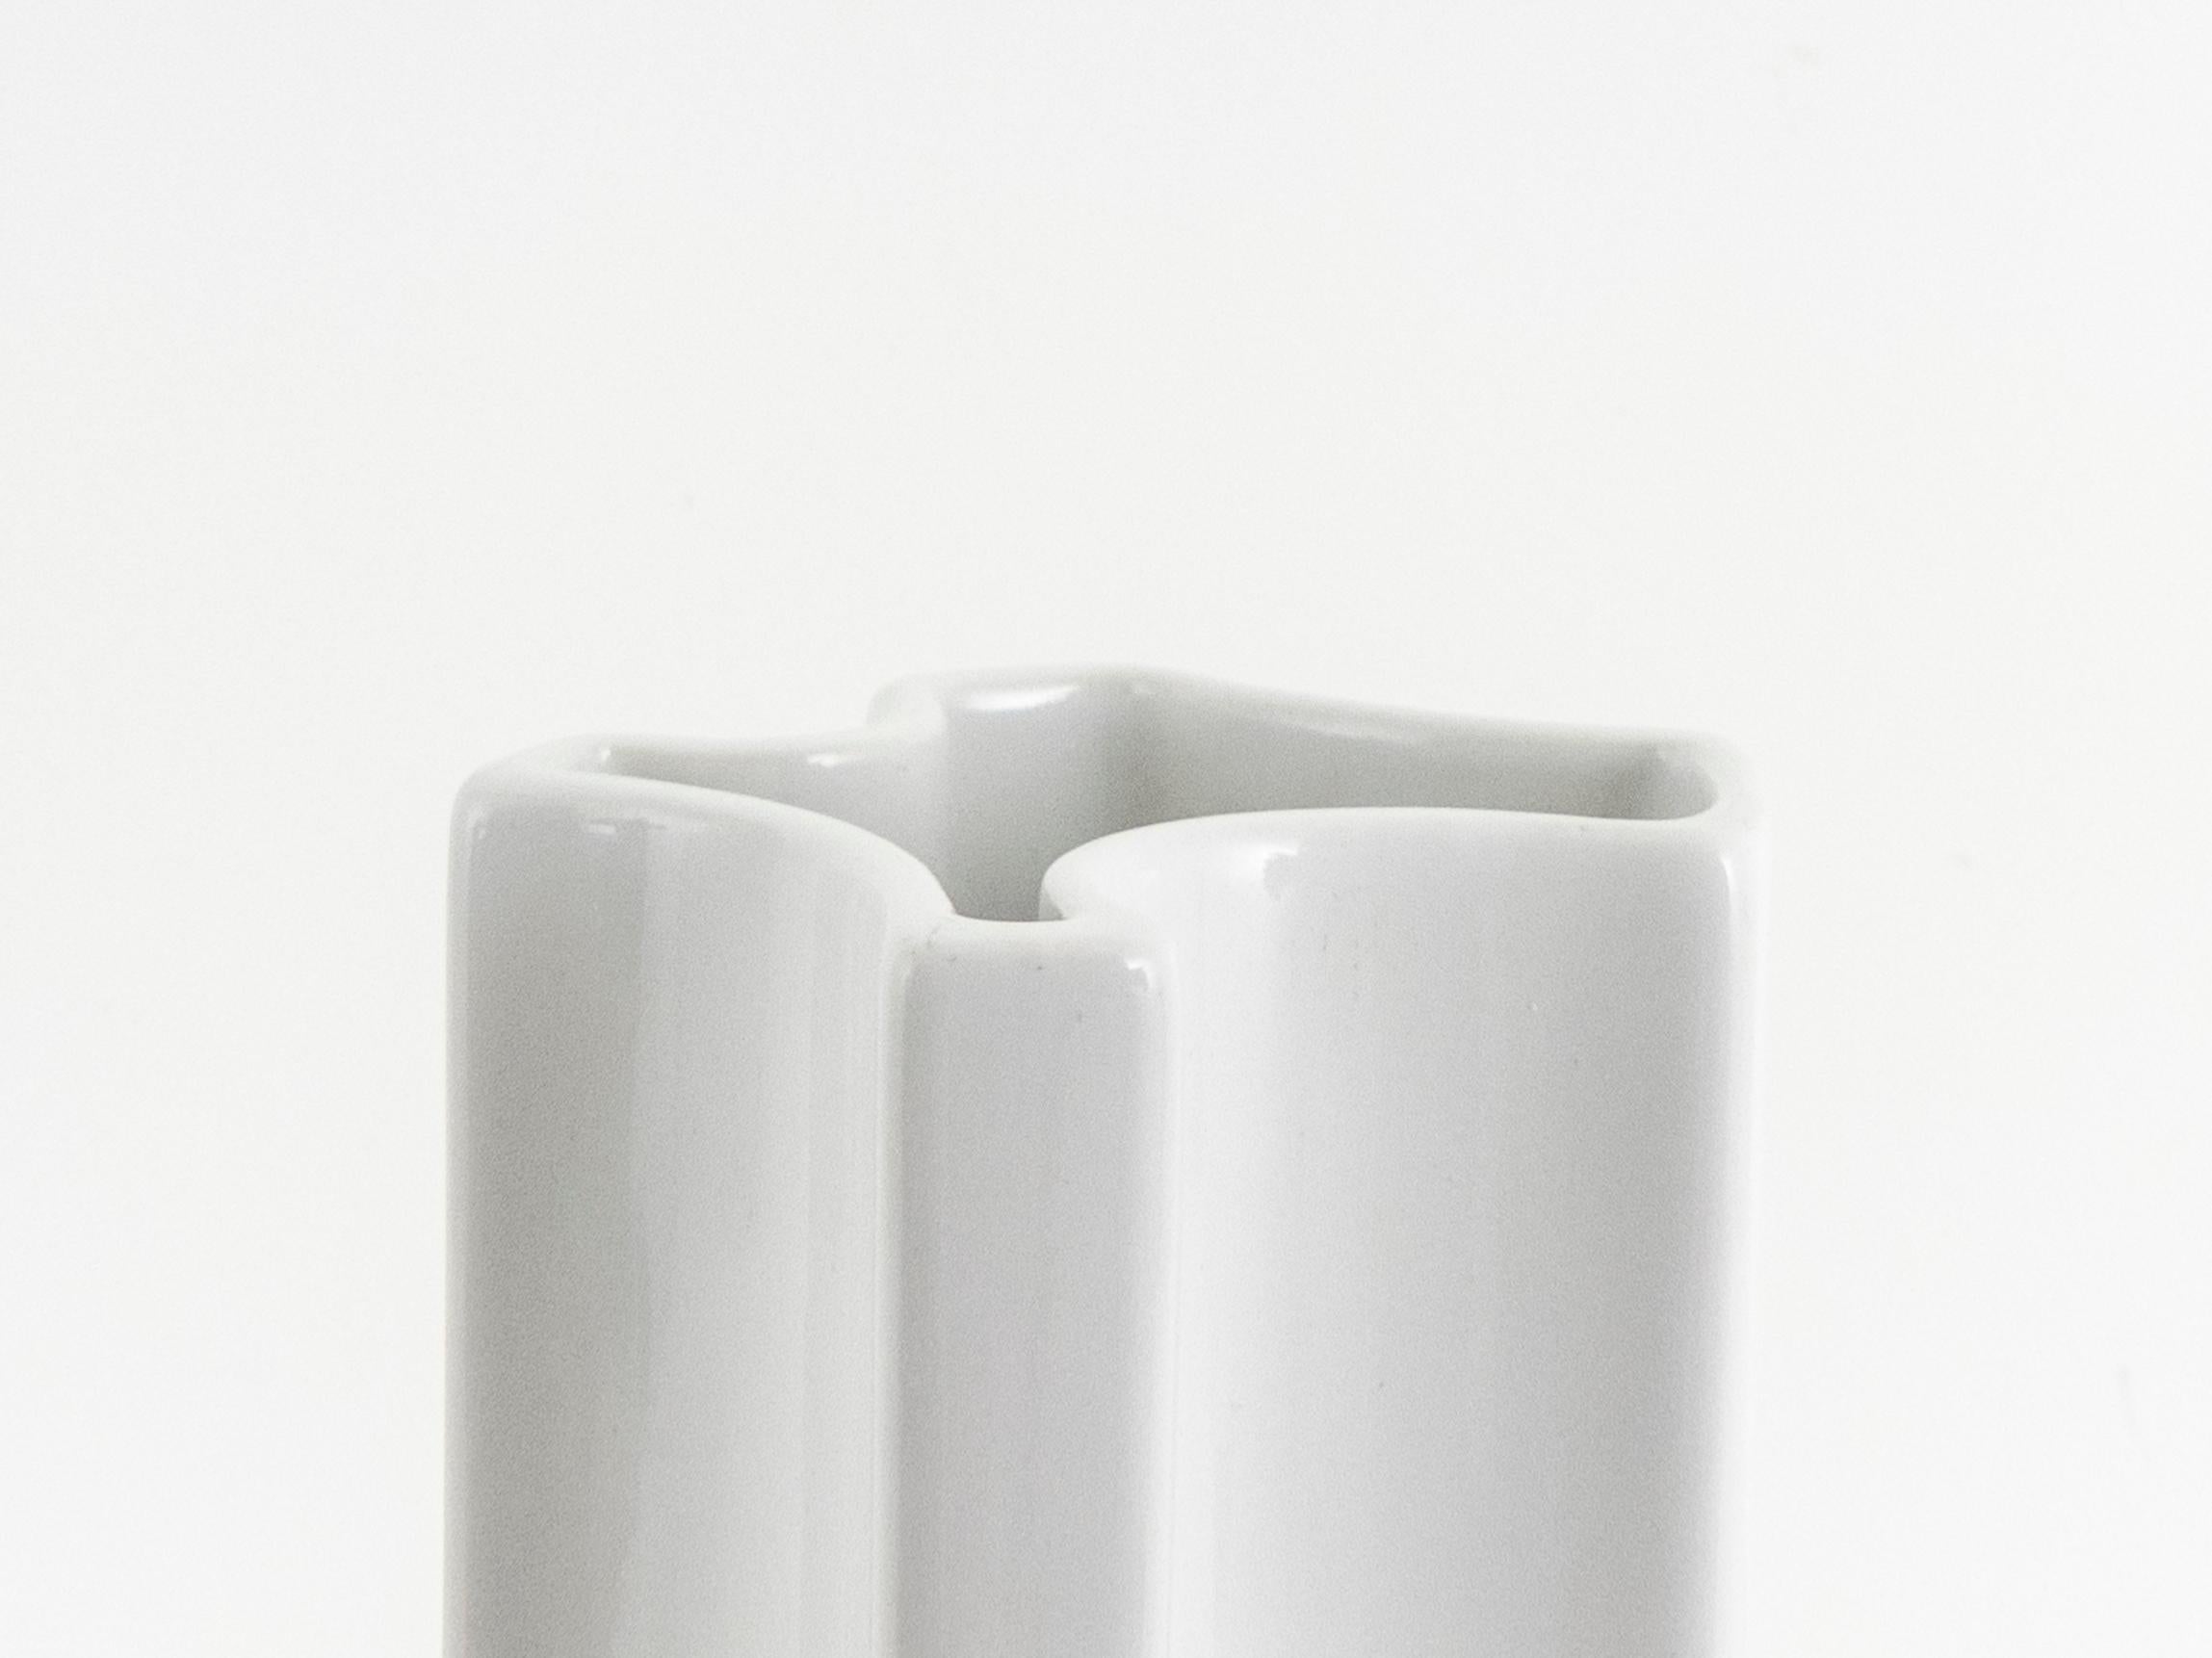 Angelo Mangiarotti Pair of M6 and M8 Ceramic Vases for Brambilla, 1960s For Sale 2